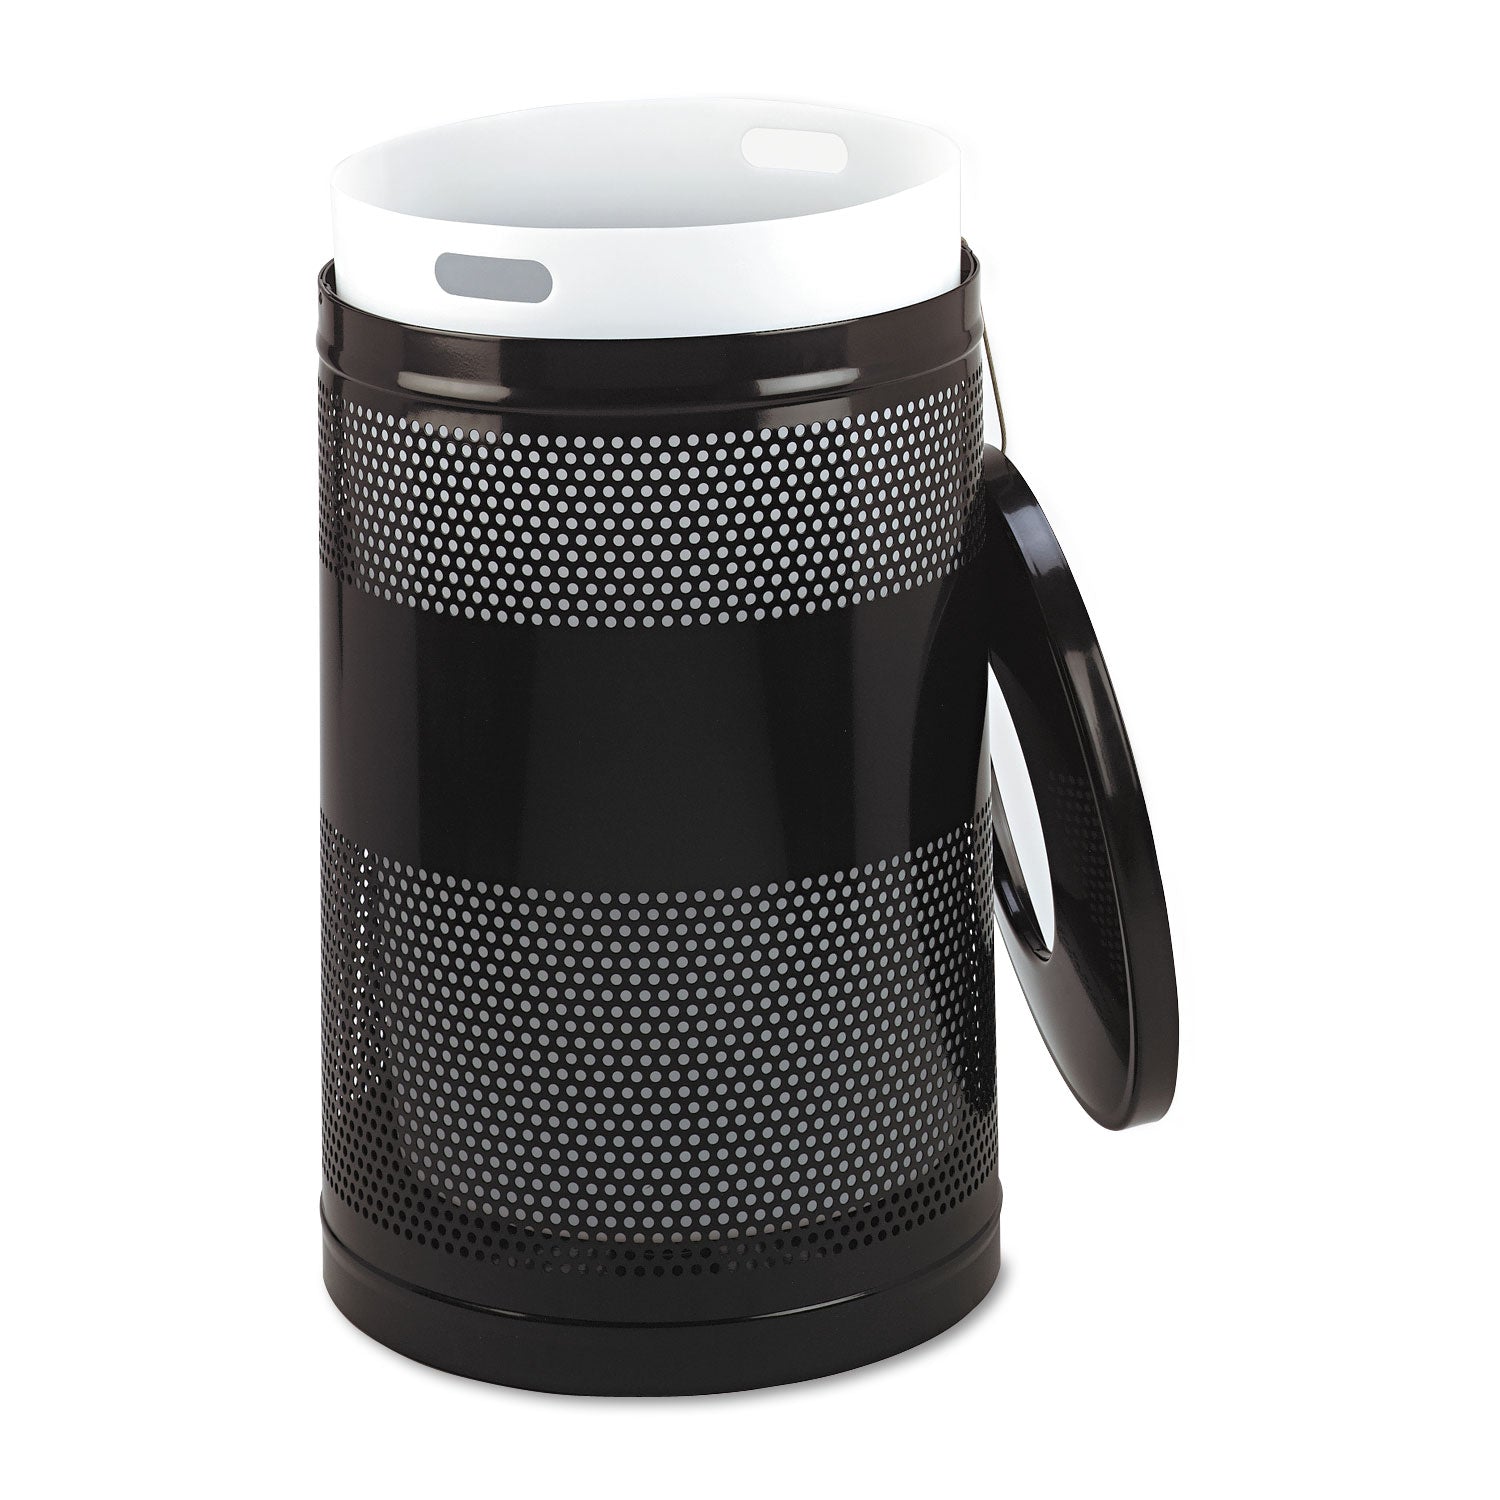 Classics Perforated Open Top Receptacle, 51 gal, Steel, Black - 